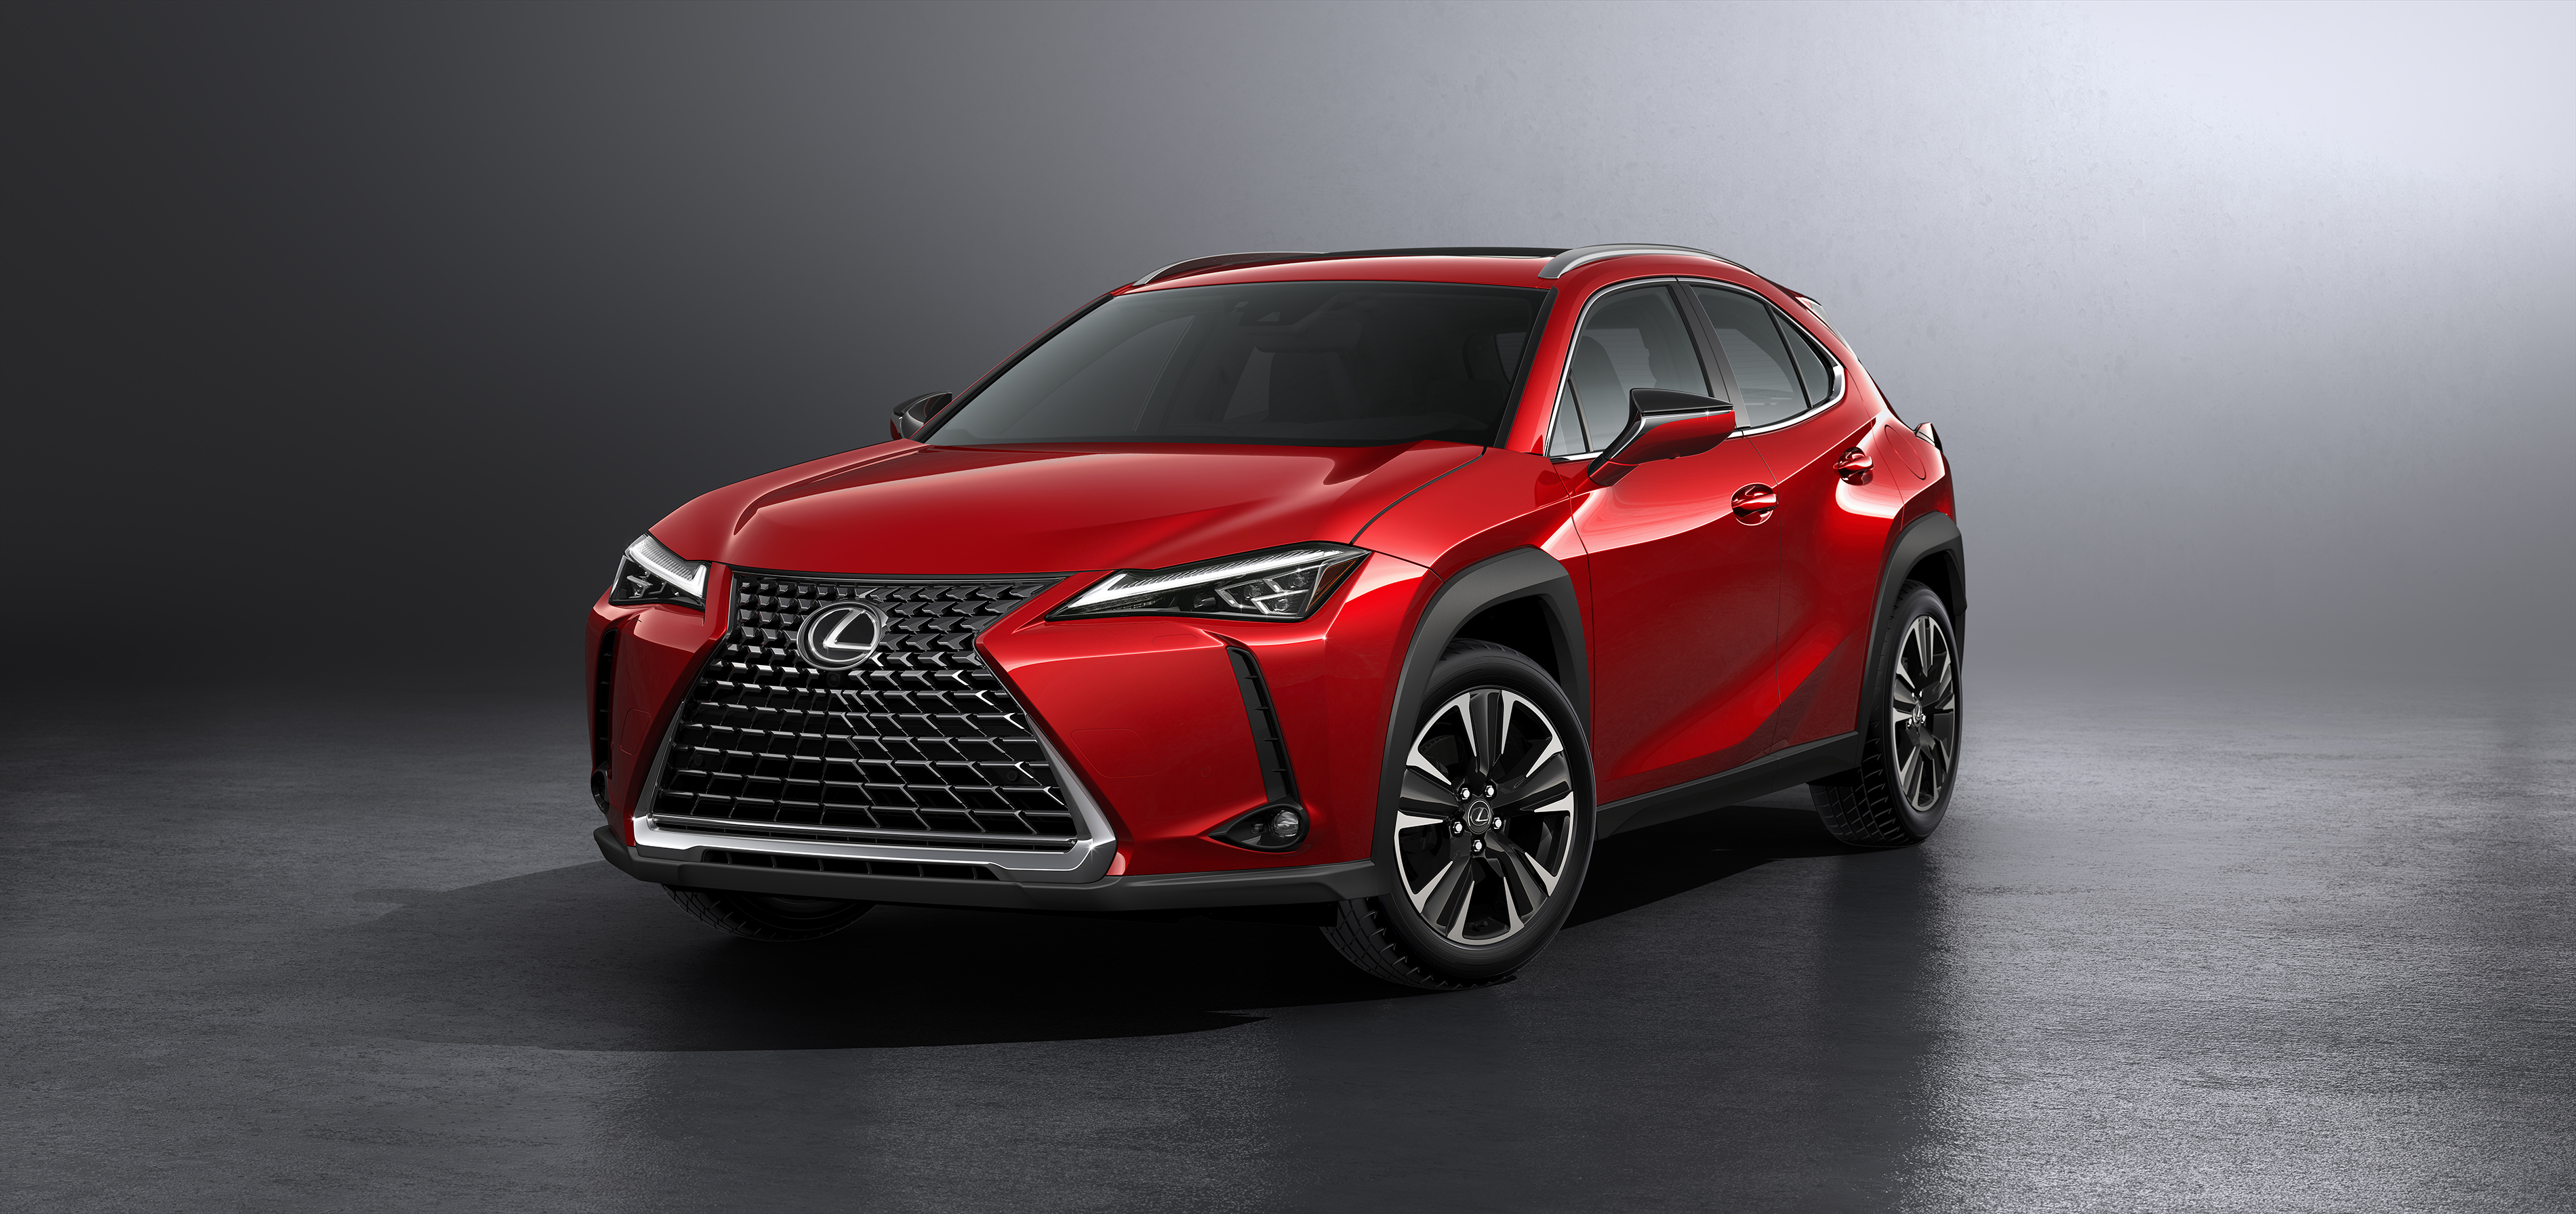 Lexus launches new genre in crossover cars through latest UX